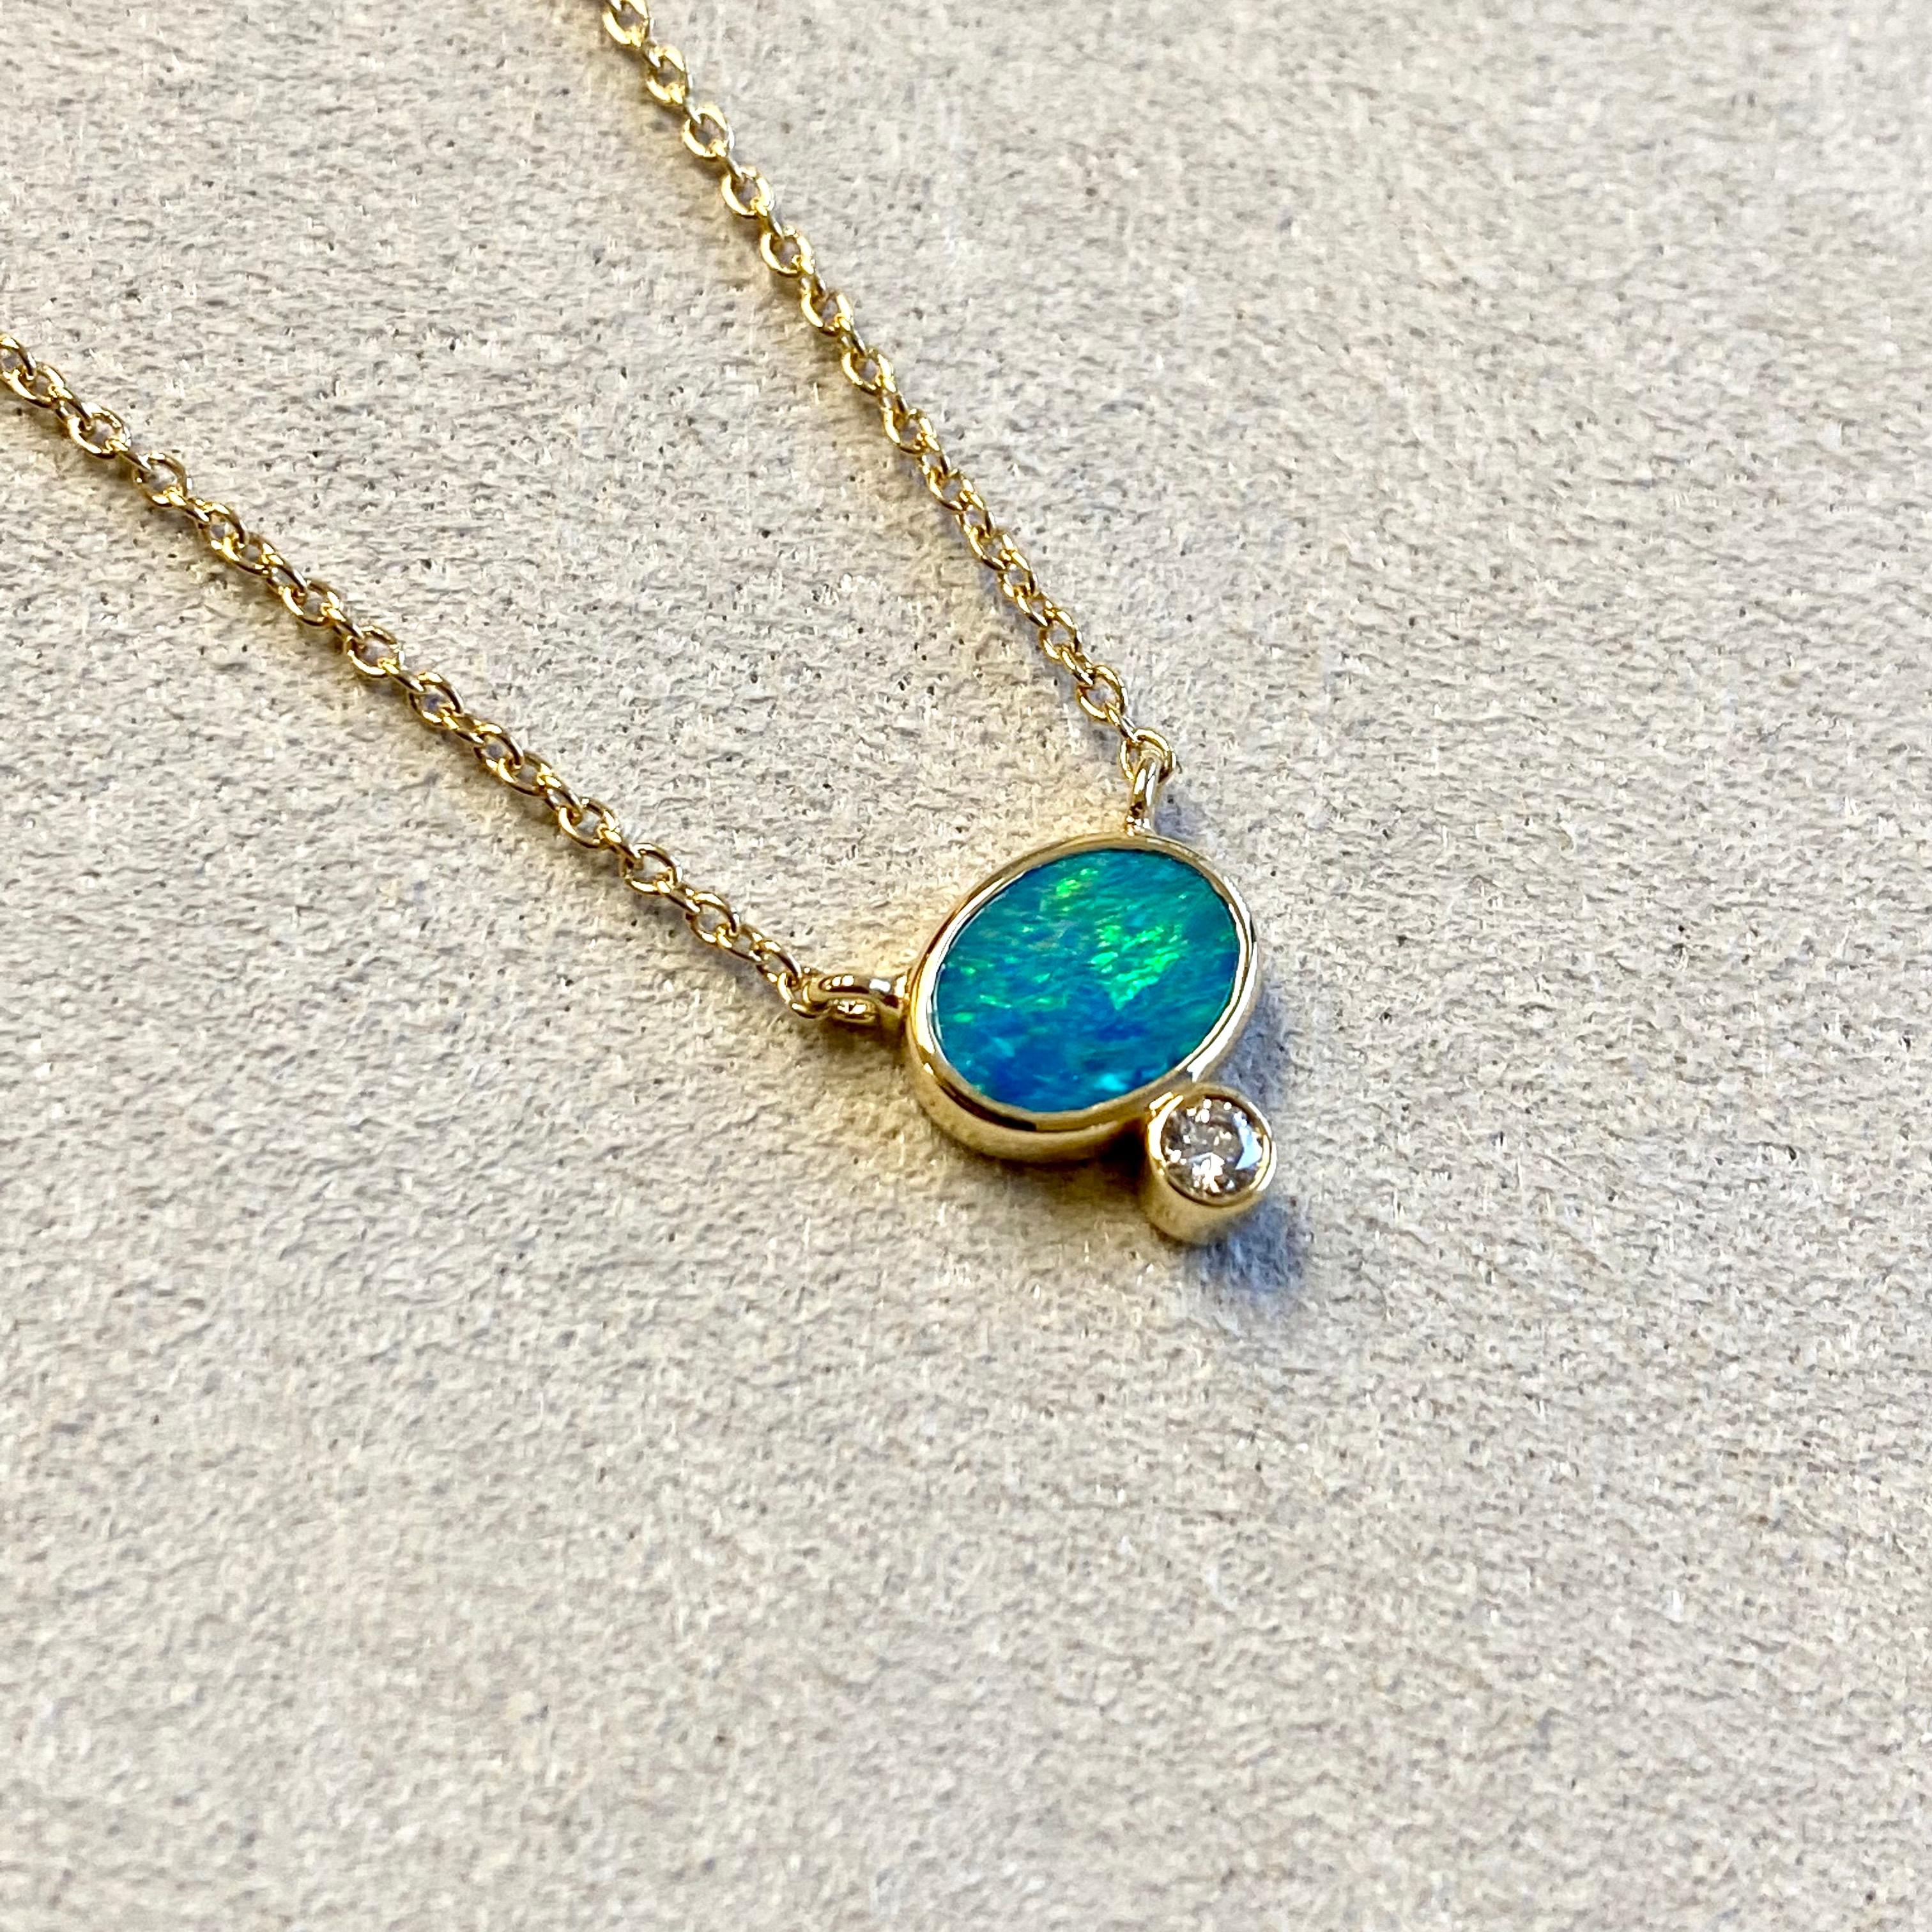 Created in 18 karat yellow gold
Boulder opal 1 carat approx.
Diamond 0.05 carat approx.
18 inch, adjustable at 16-17
Lobster clasp
Limited edition

Exquisite 18 karat yellow gold is the foundation of this limited-edition necklace, punctuated by a